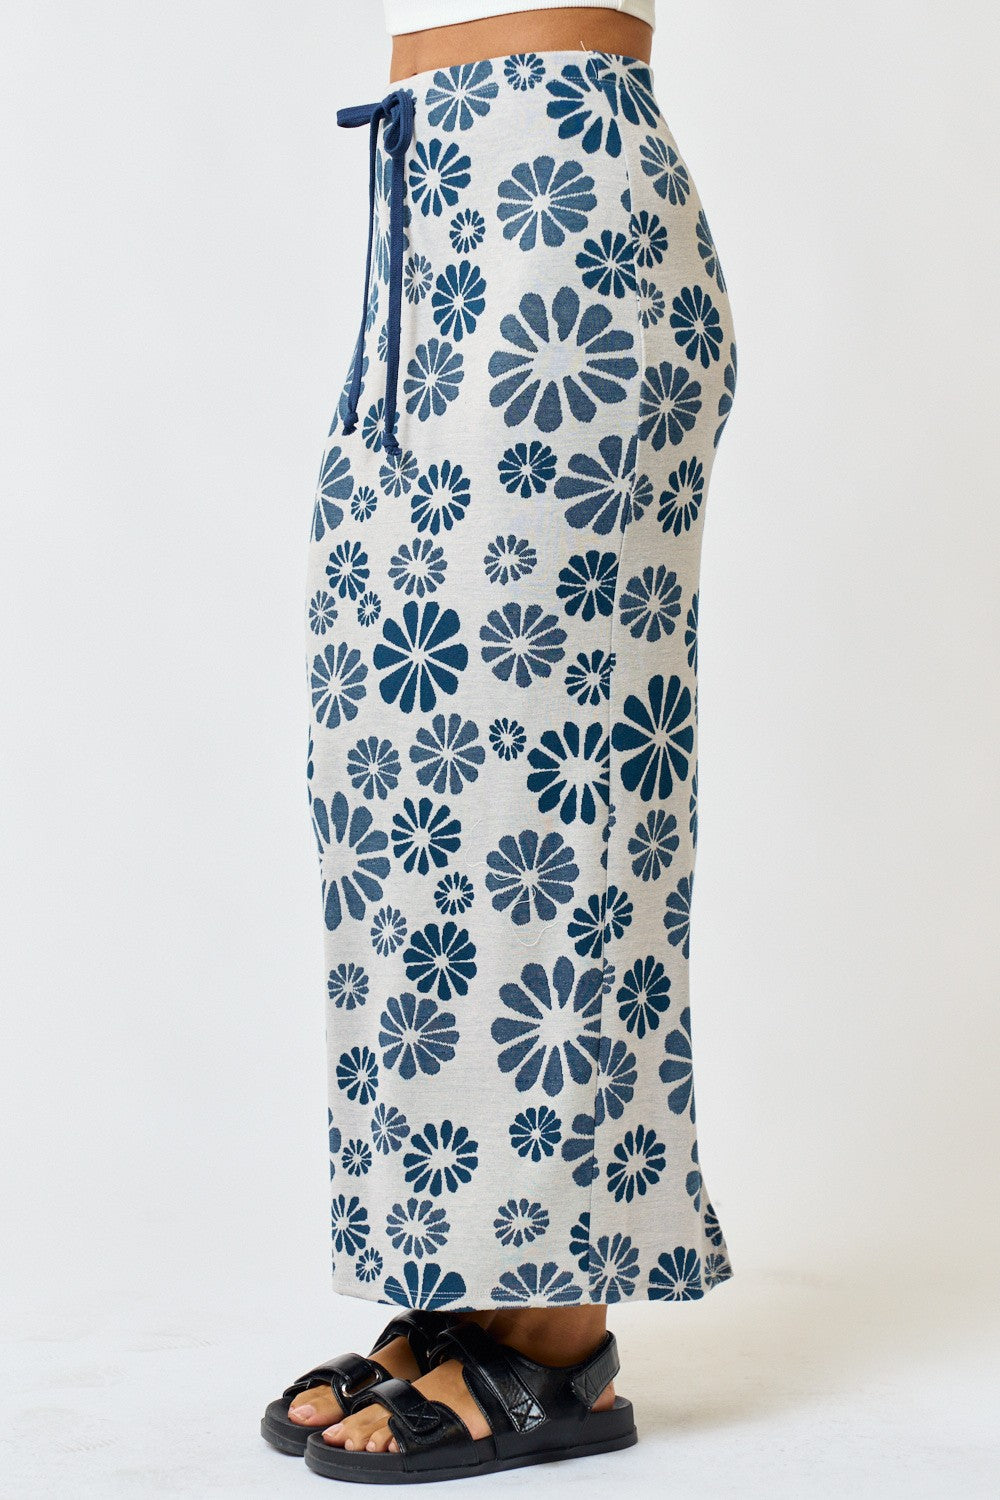 Floral Print Maxi Skirt: Slim fit with adjustable tie waist, back slit, and captivating floral design. Effortlessly stylish and machine washable for convenience. A versatile addition to your wardrobe for any occasion.